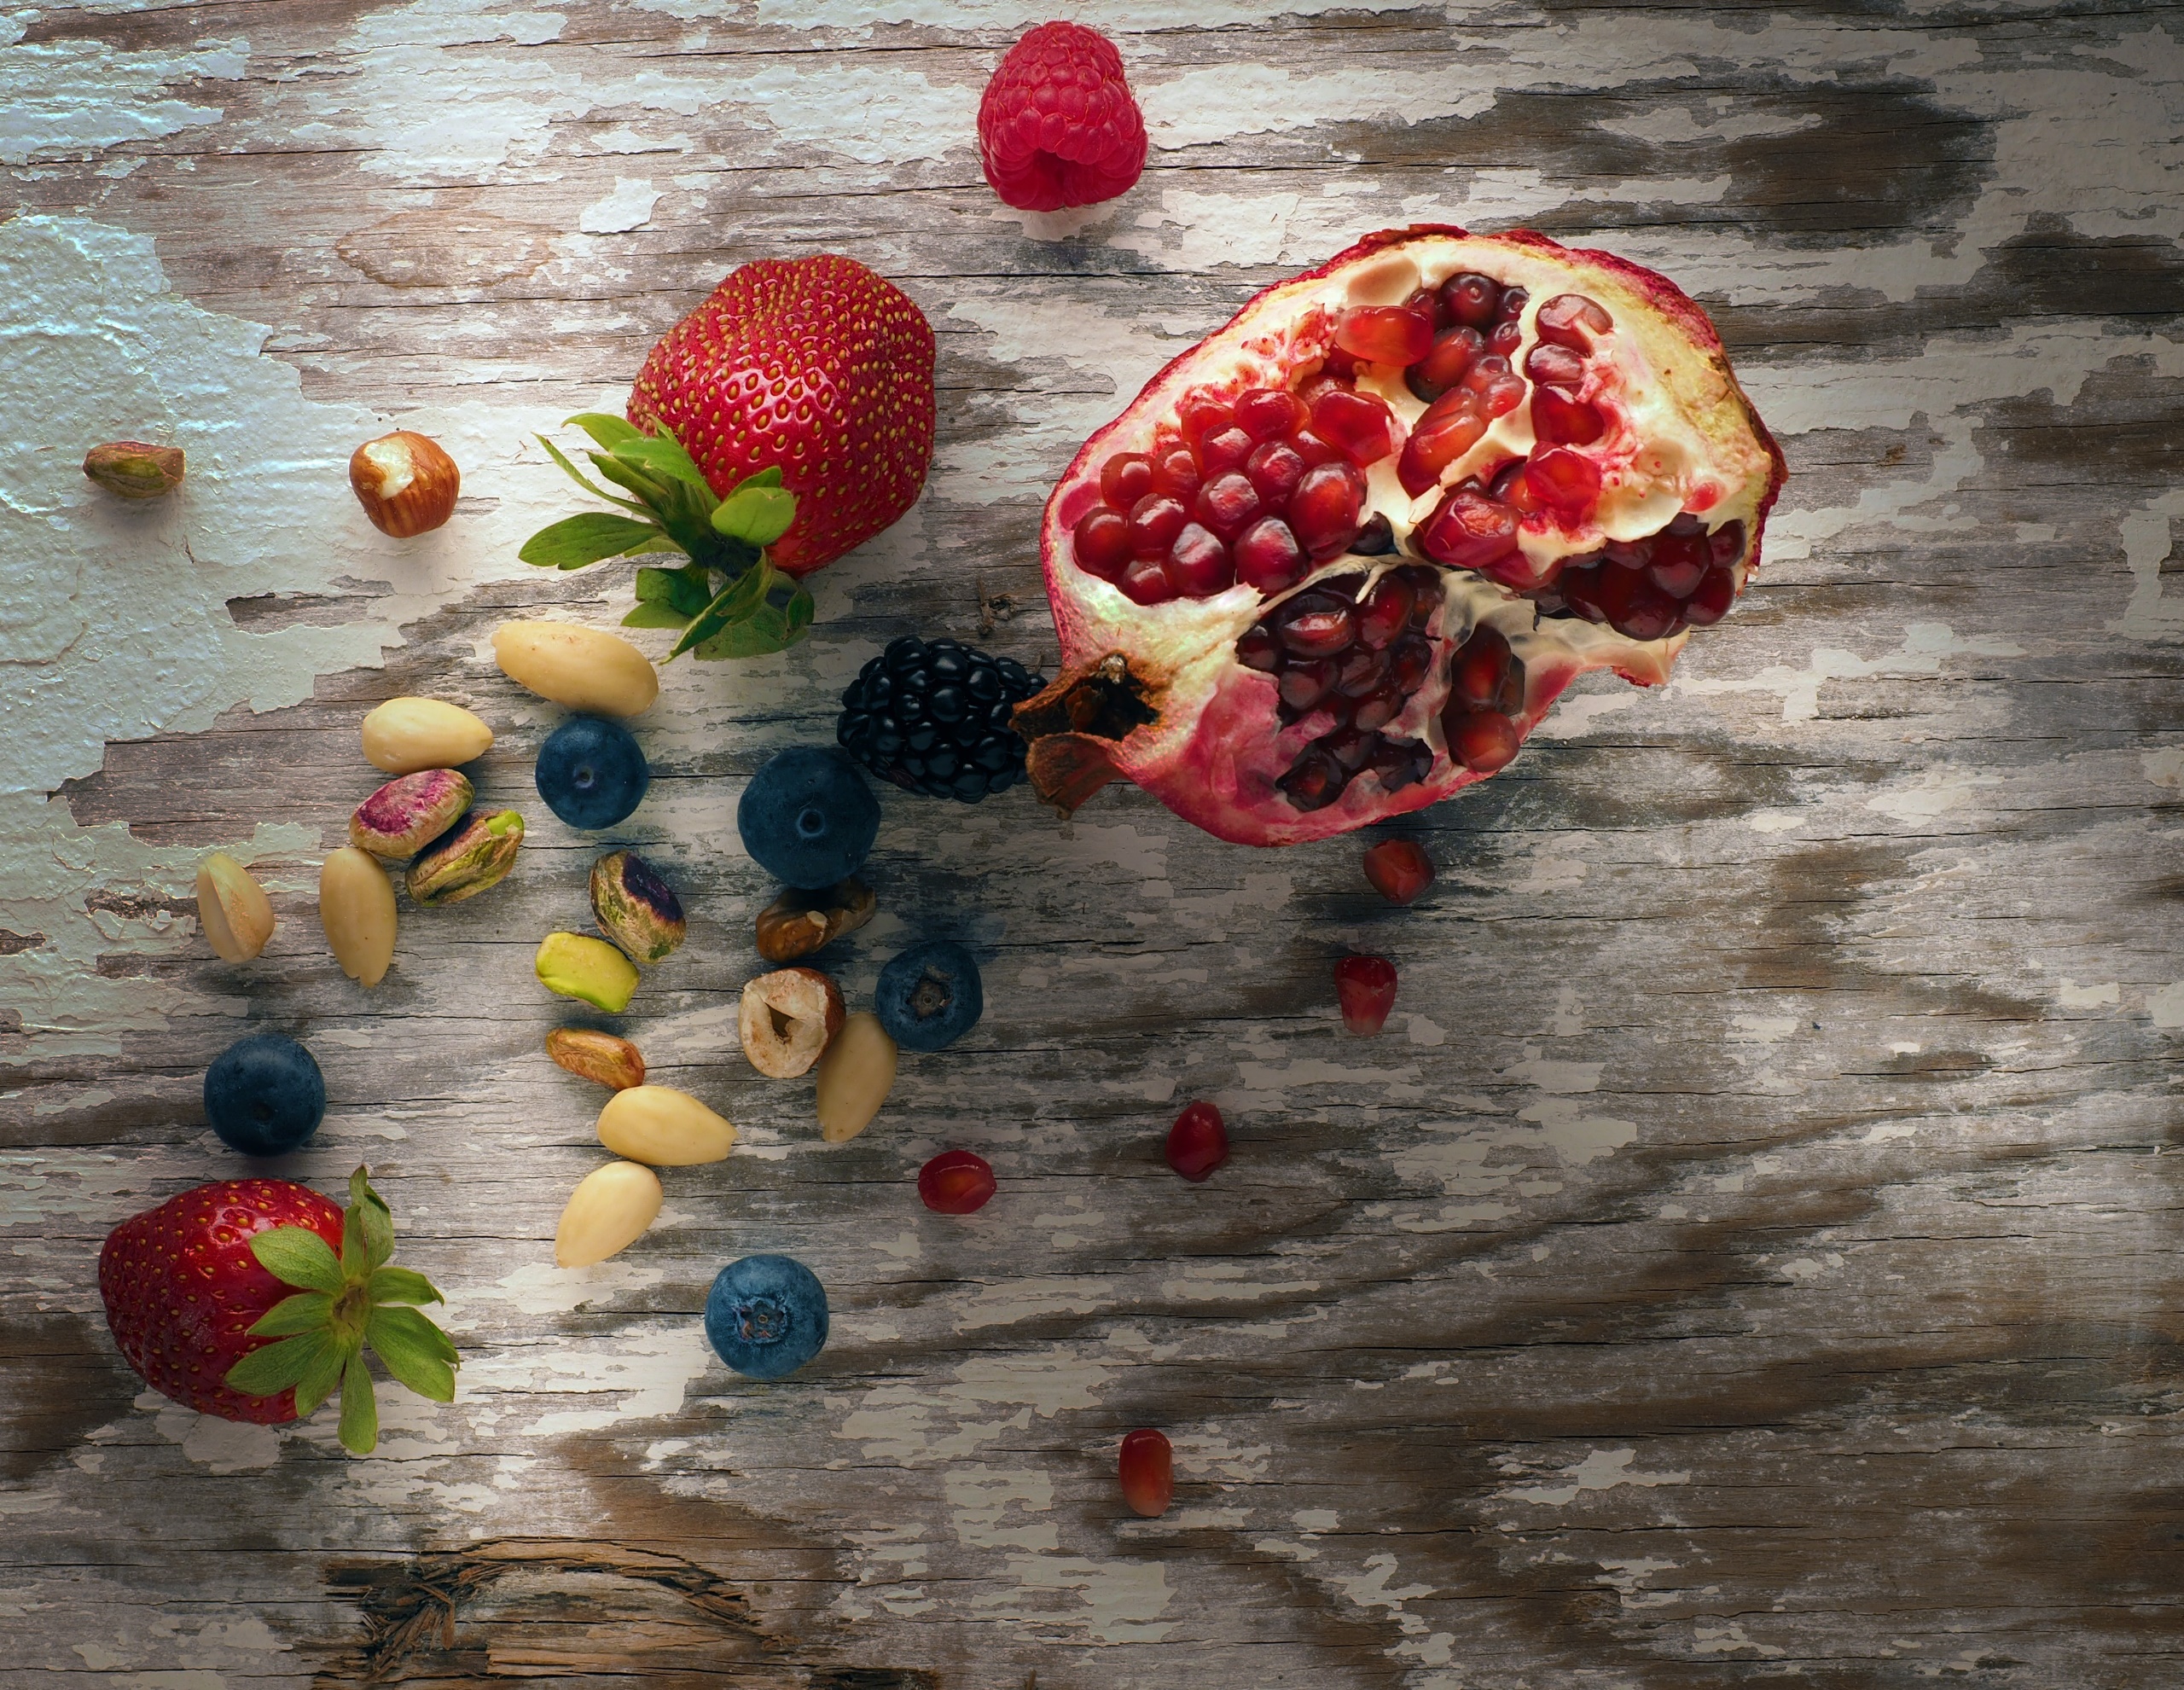 General 2560x1981 food fruit berries strawberries blueberries pomegranate top view wooden surface